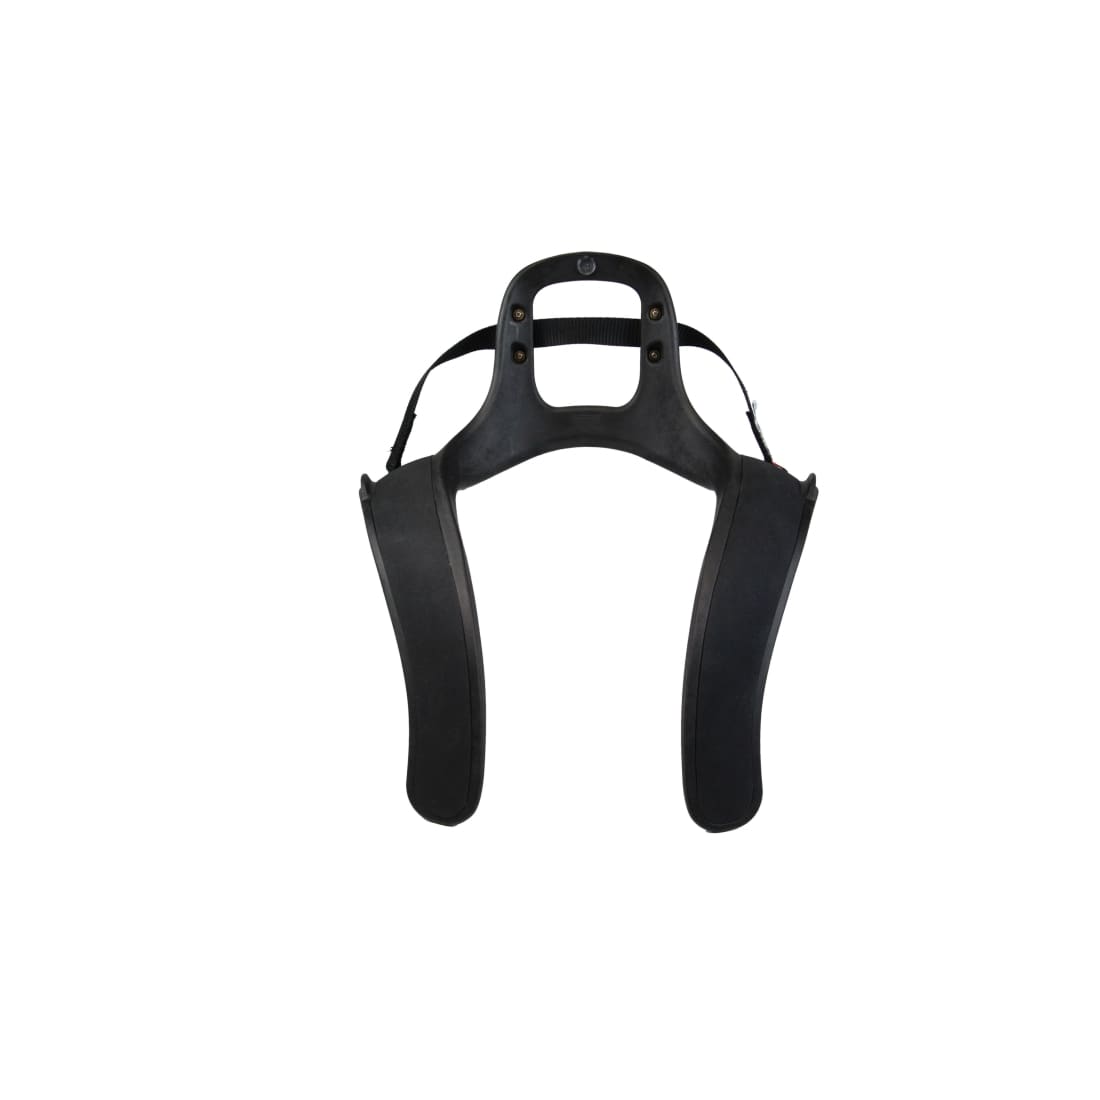 stand 21 club 3 hans device